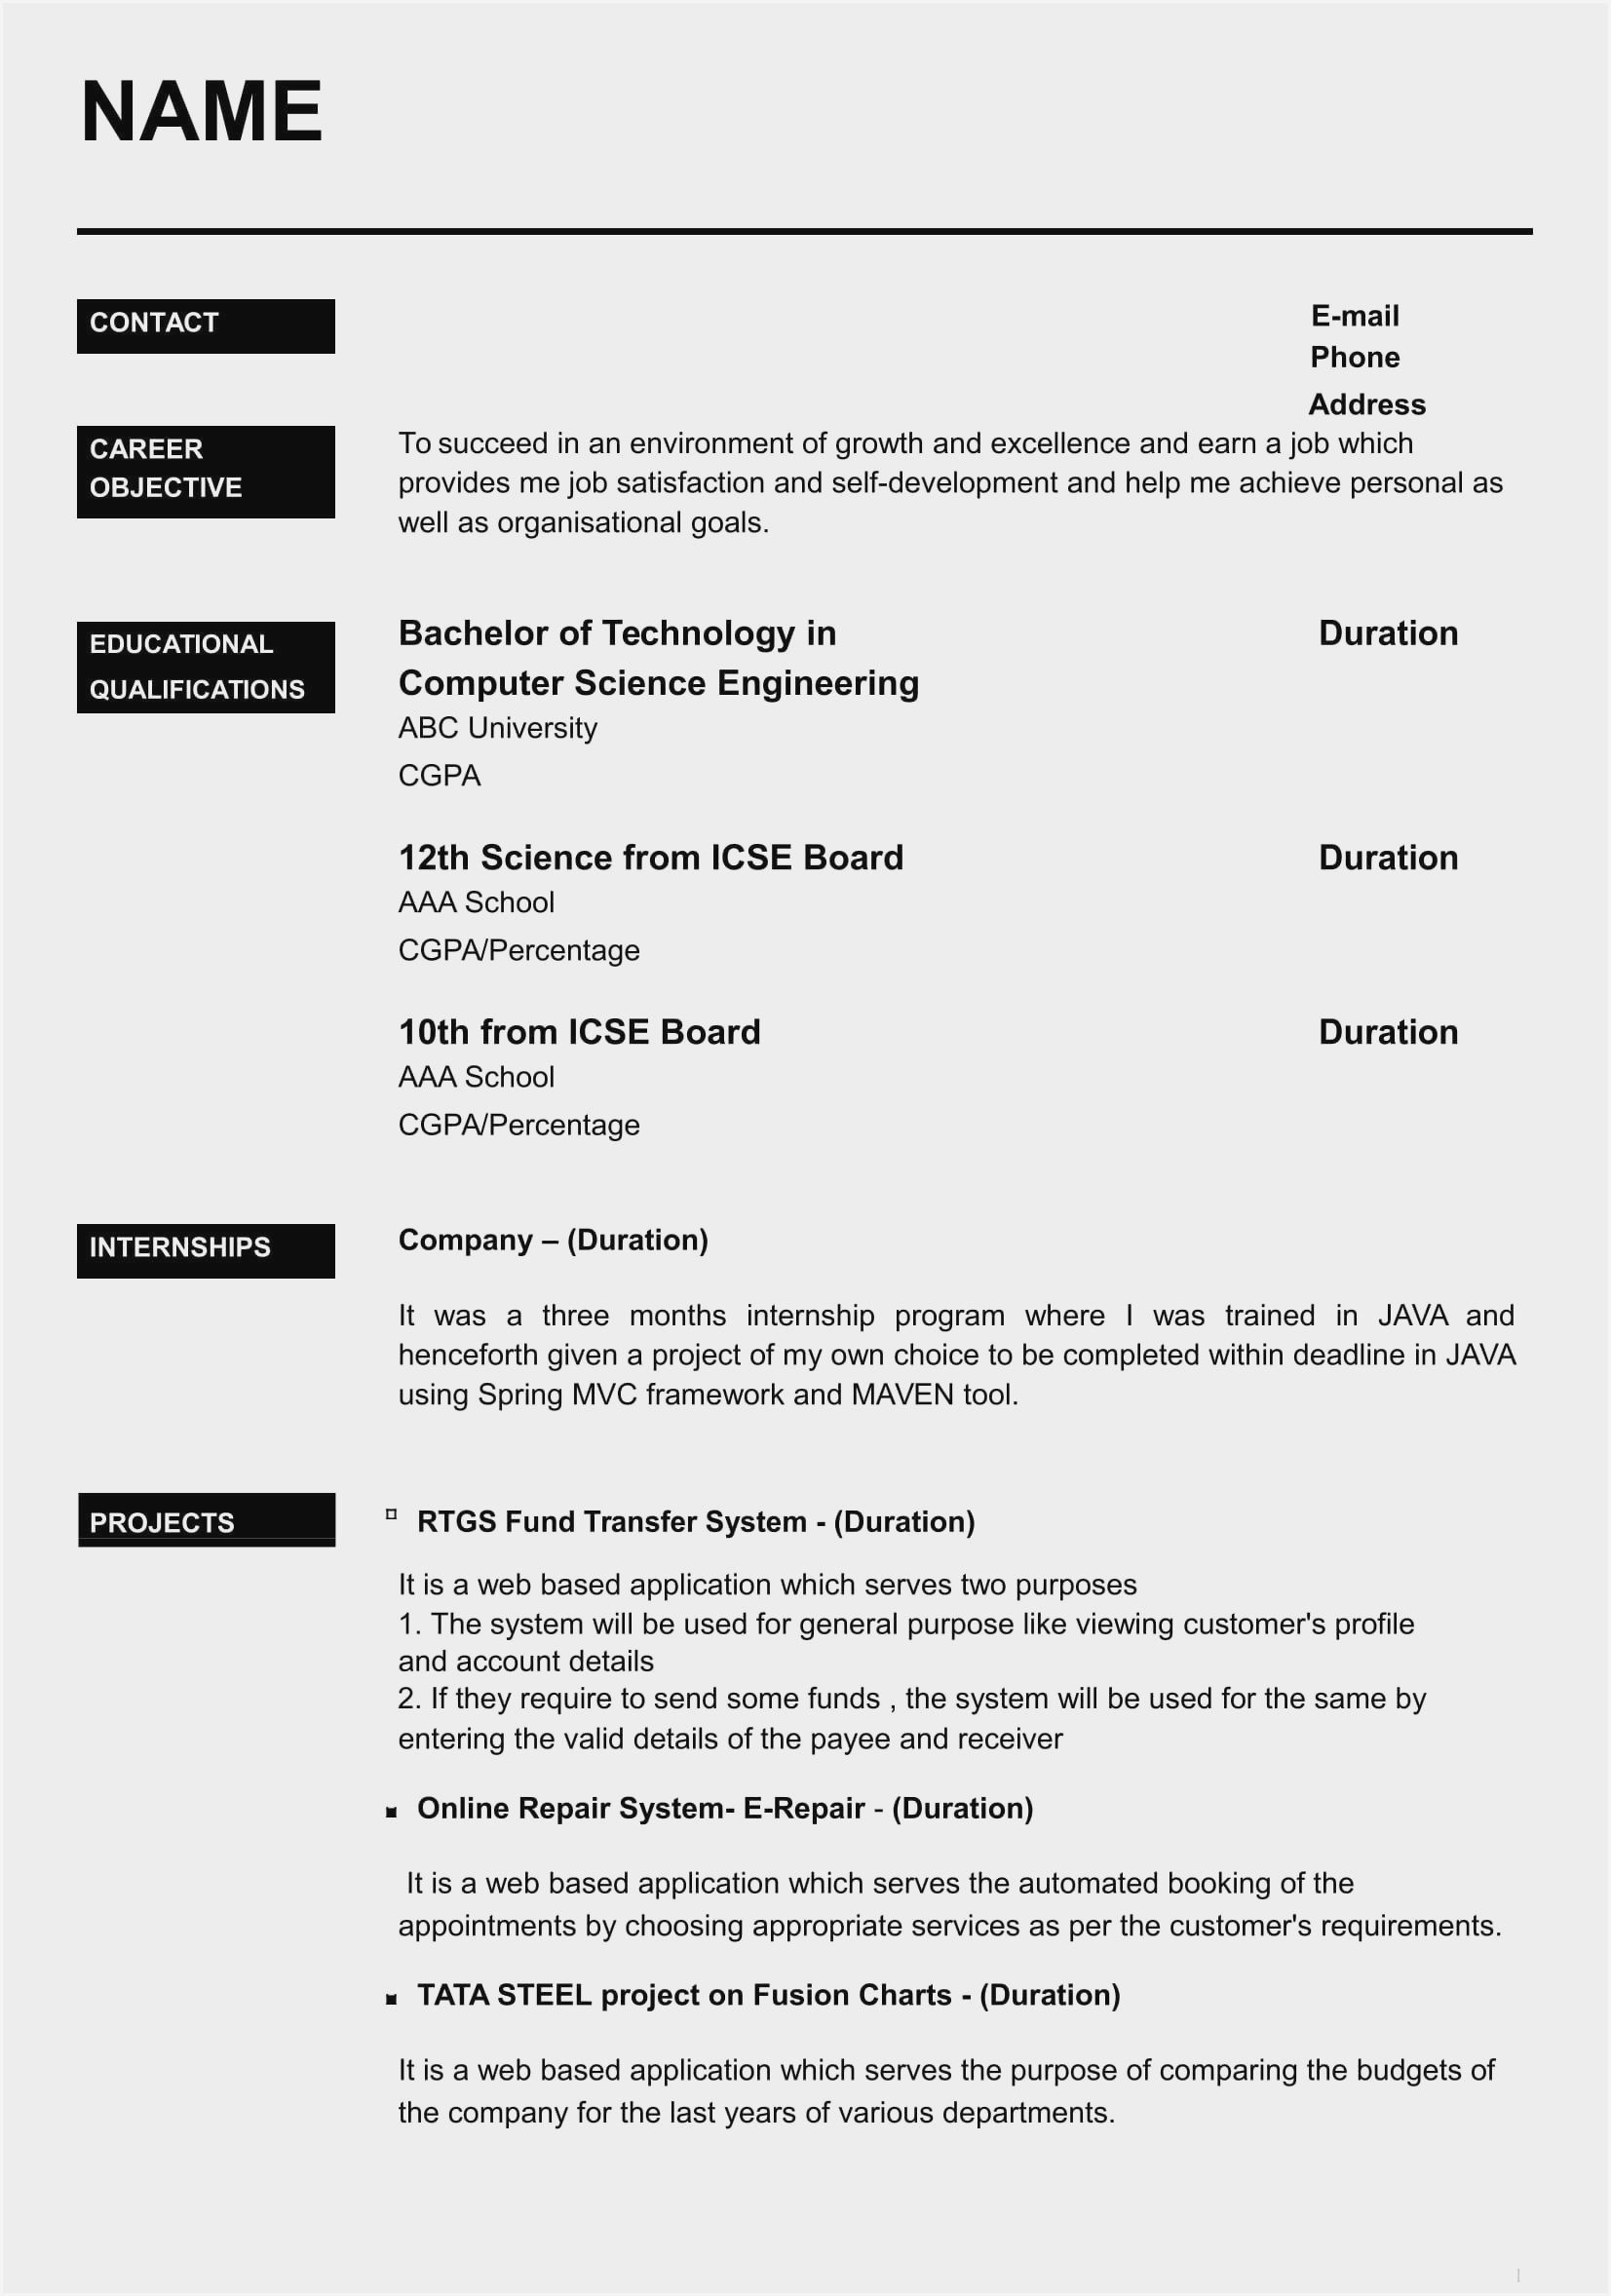 Resume Samples for Engineering Students In India Resume format Pdf Download for Freshers India Job Resume …